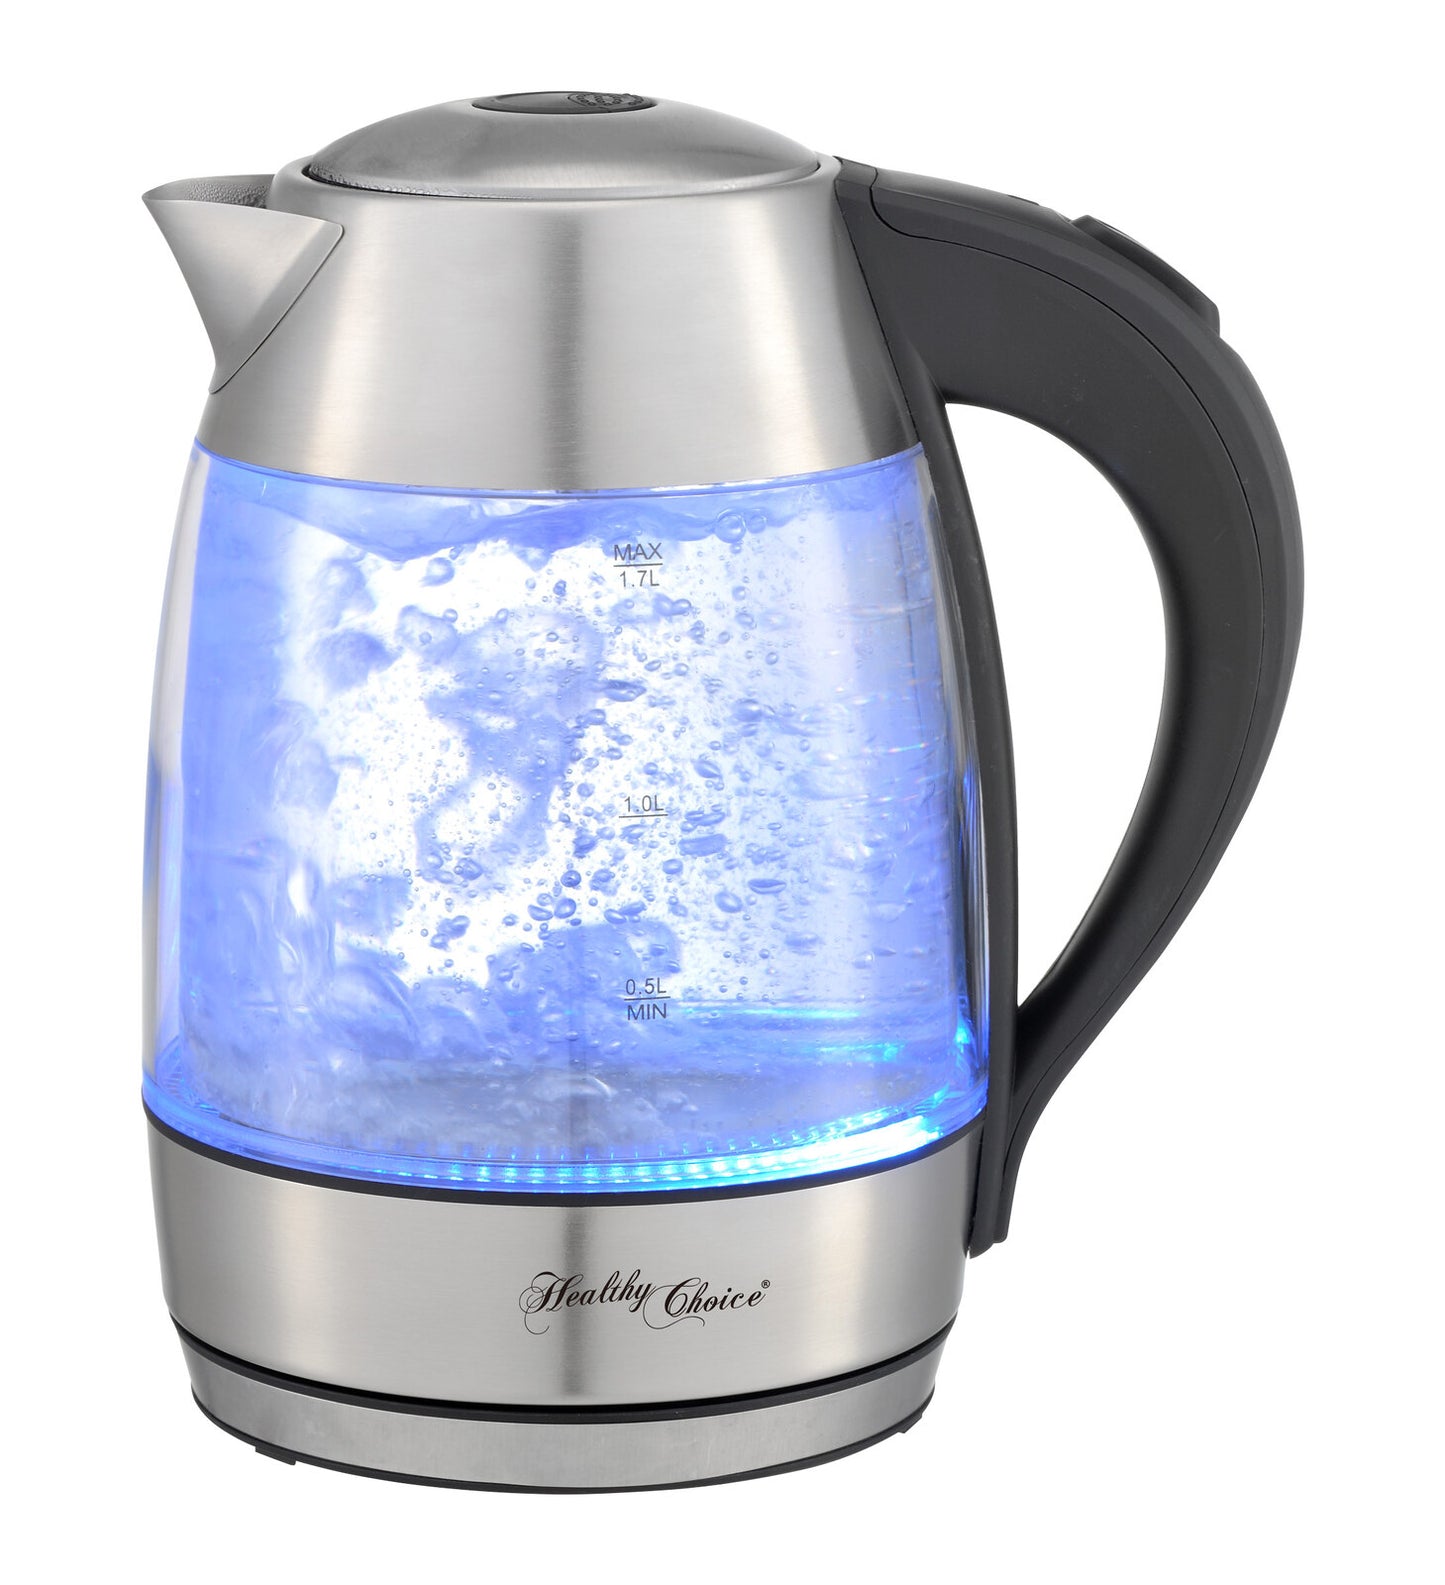 1.7 Litre Glass Kettle with 360 Degrees Rotational Base